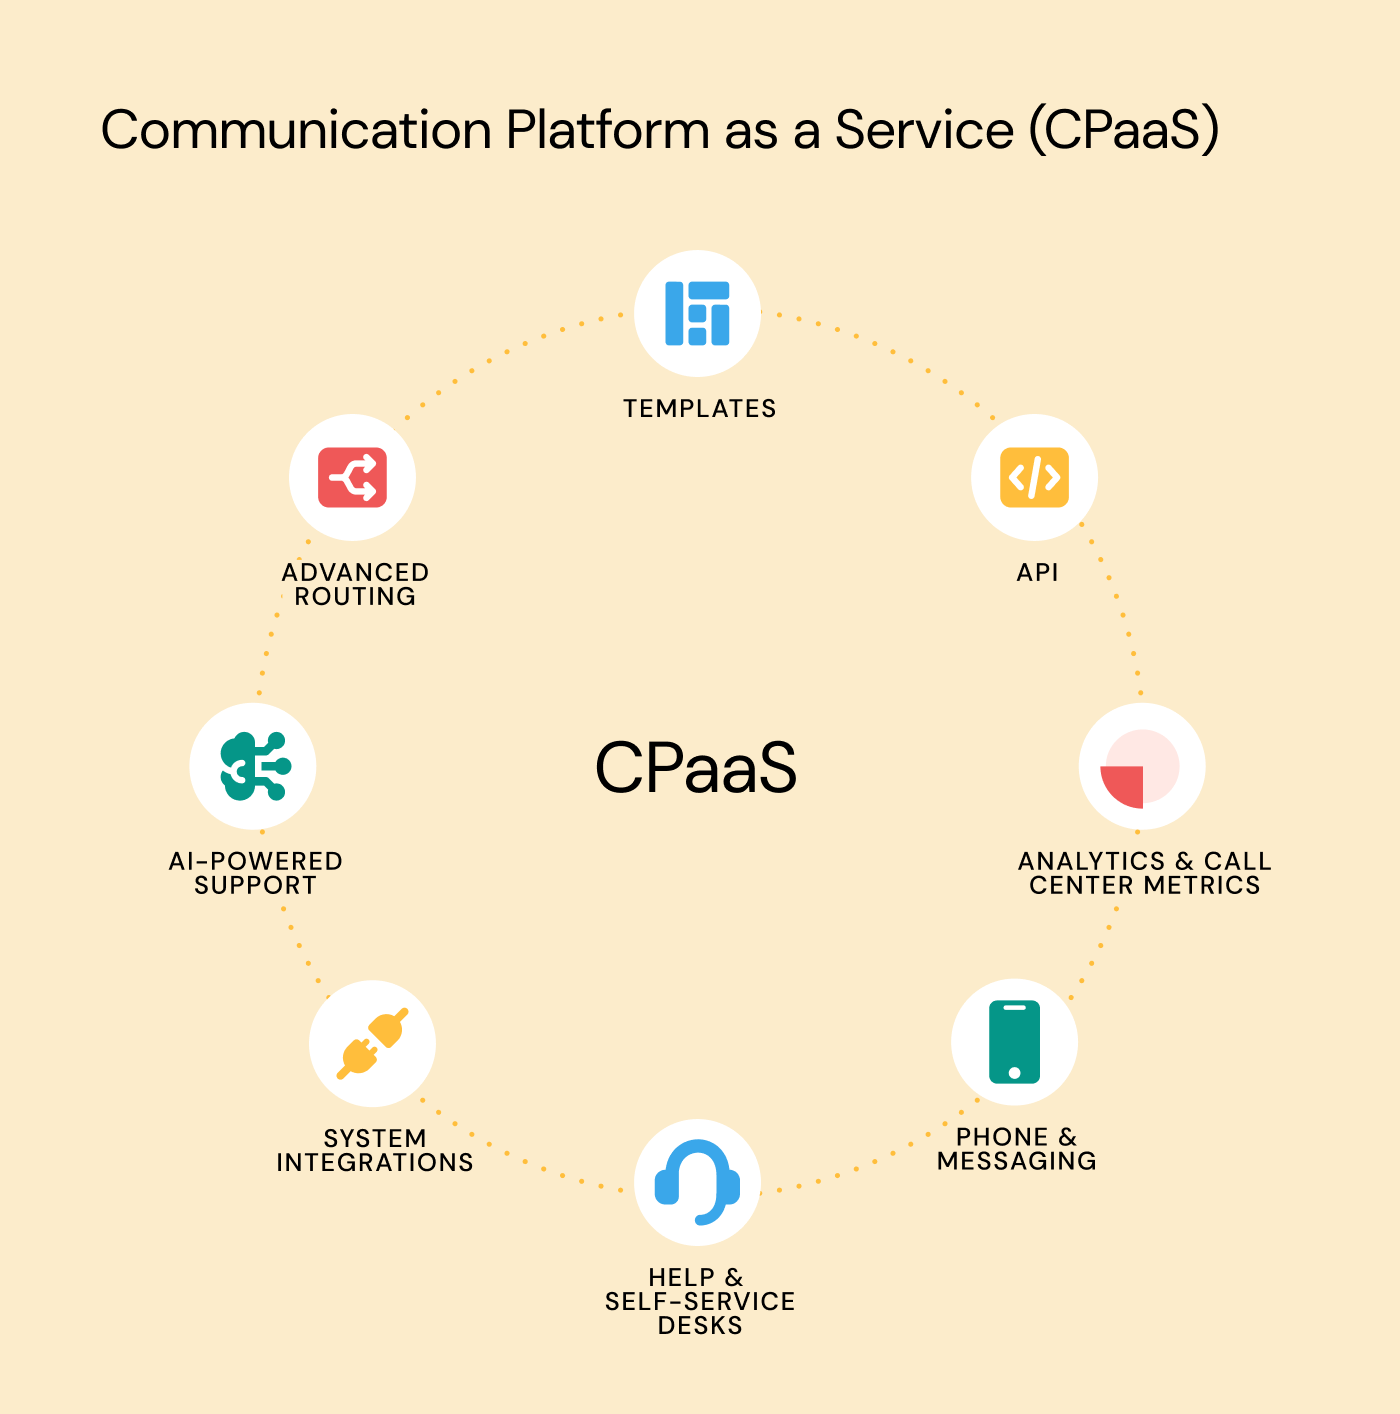 Key features of CPaaS